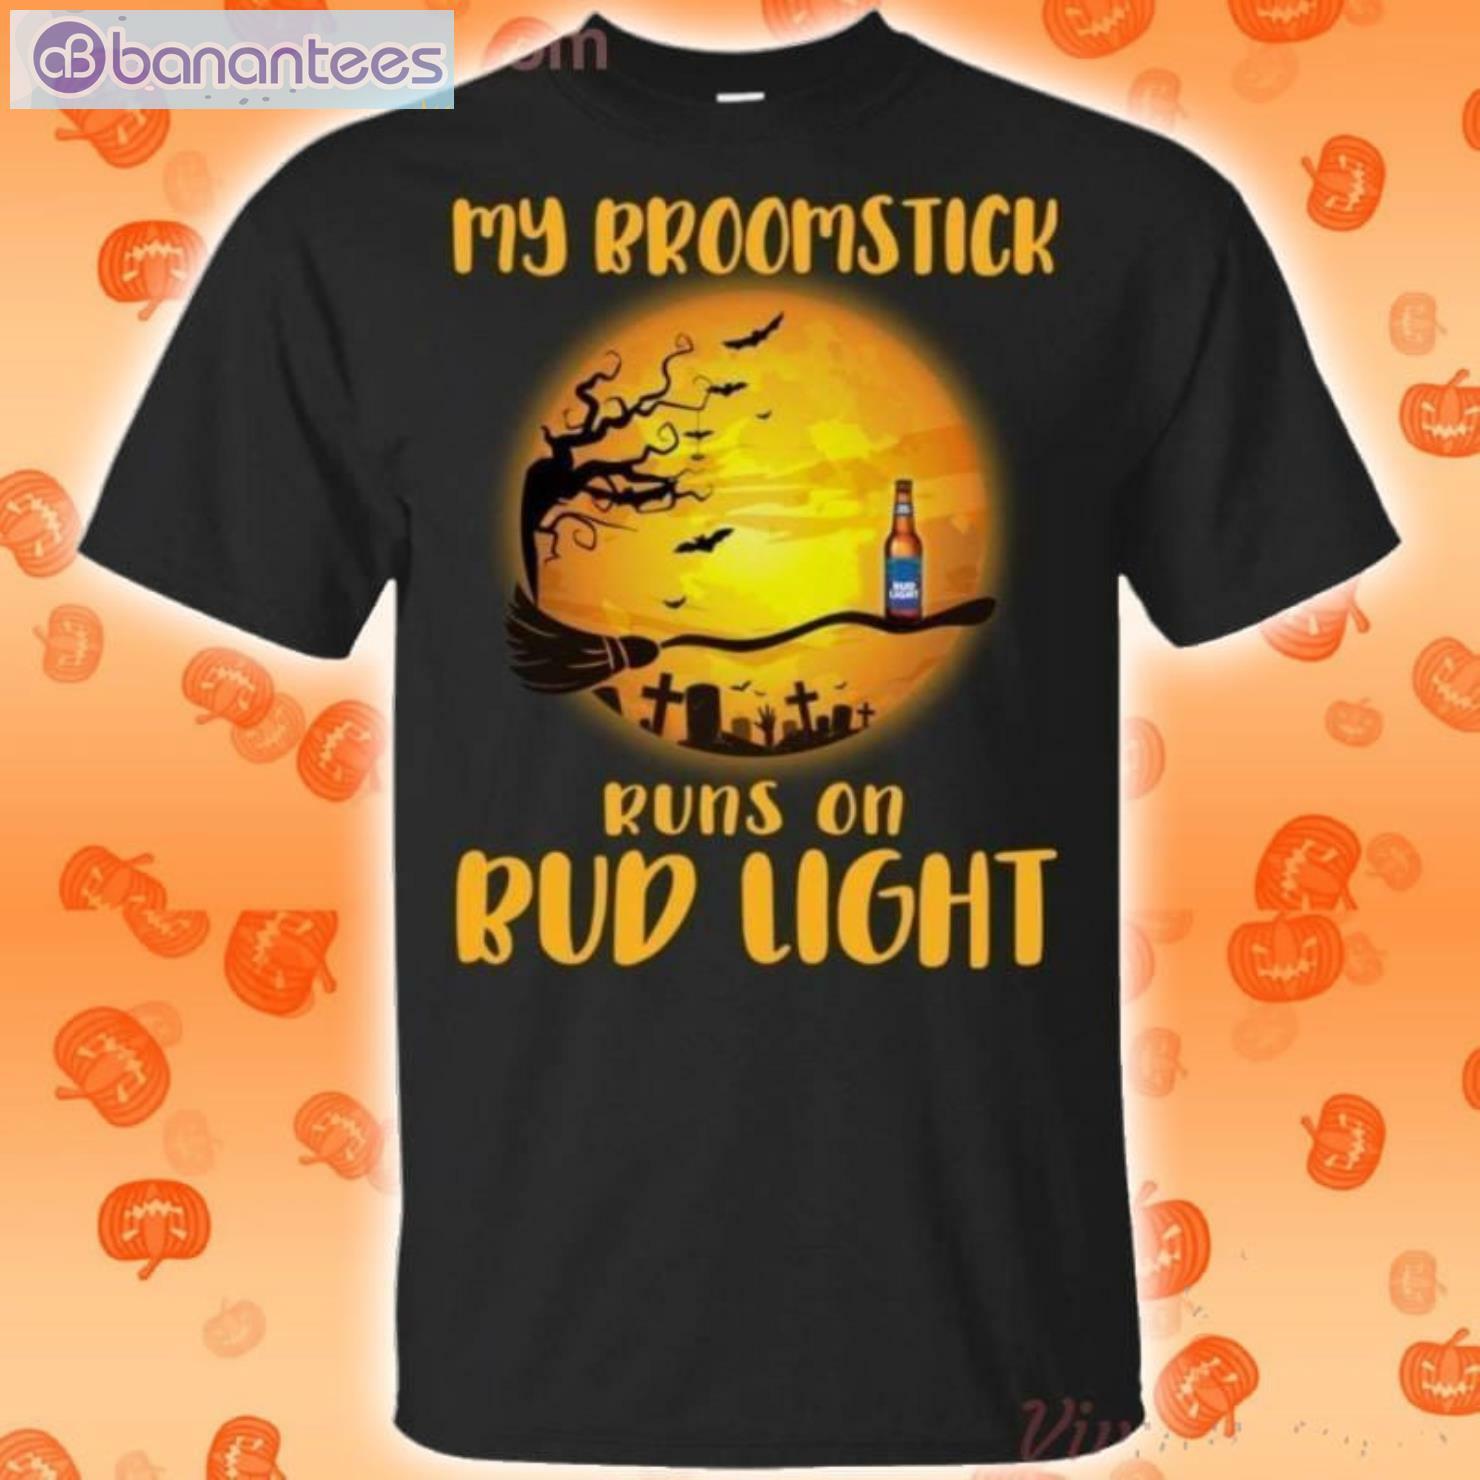 My Broomstick Runs On Bud Light Funny Beer Halloween T-Shirt Product Photo 1 Product photo 1